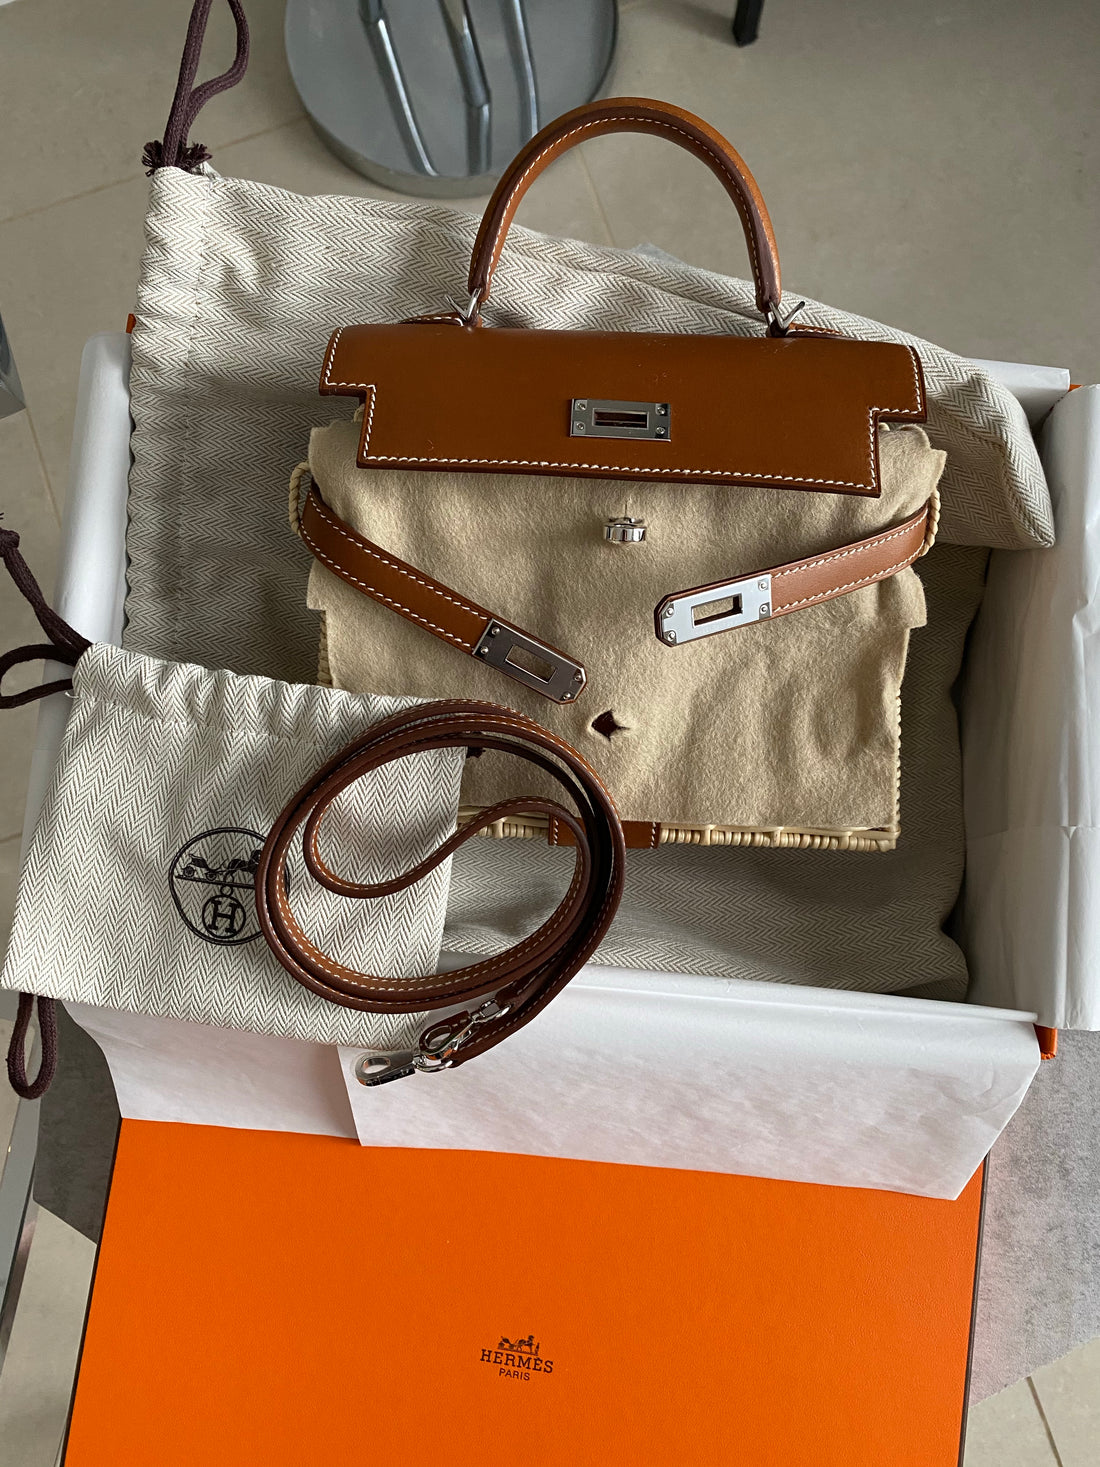 HERMÈS Limited Edition Kelly Picnic 35 handbag in Osier Wicker and